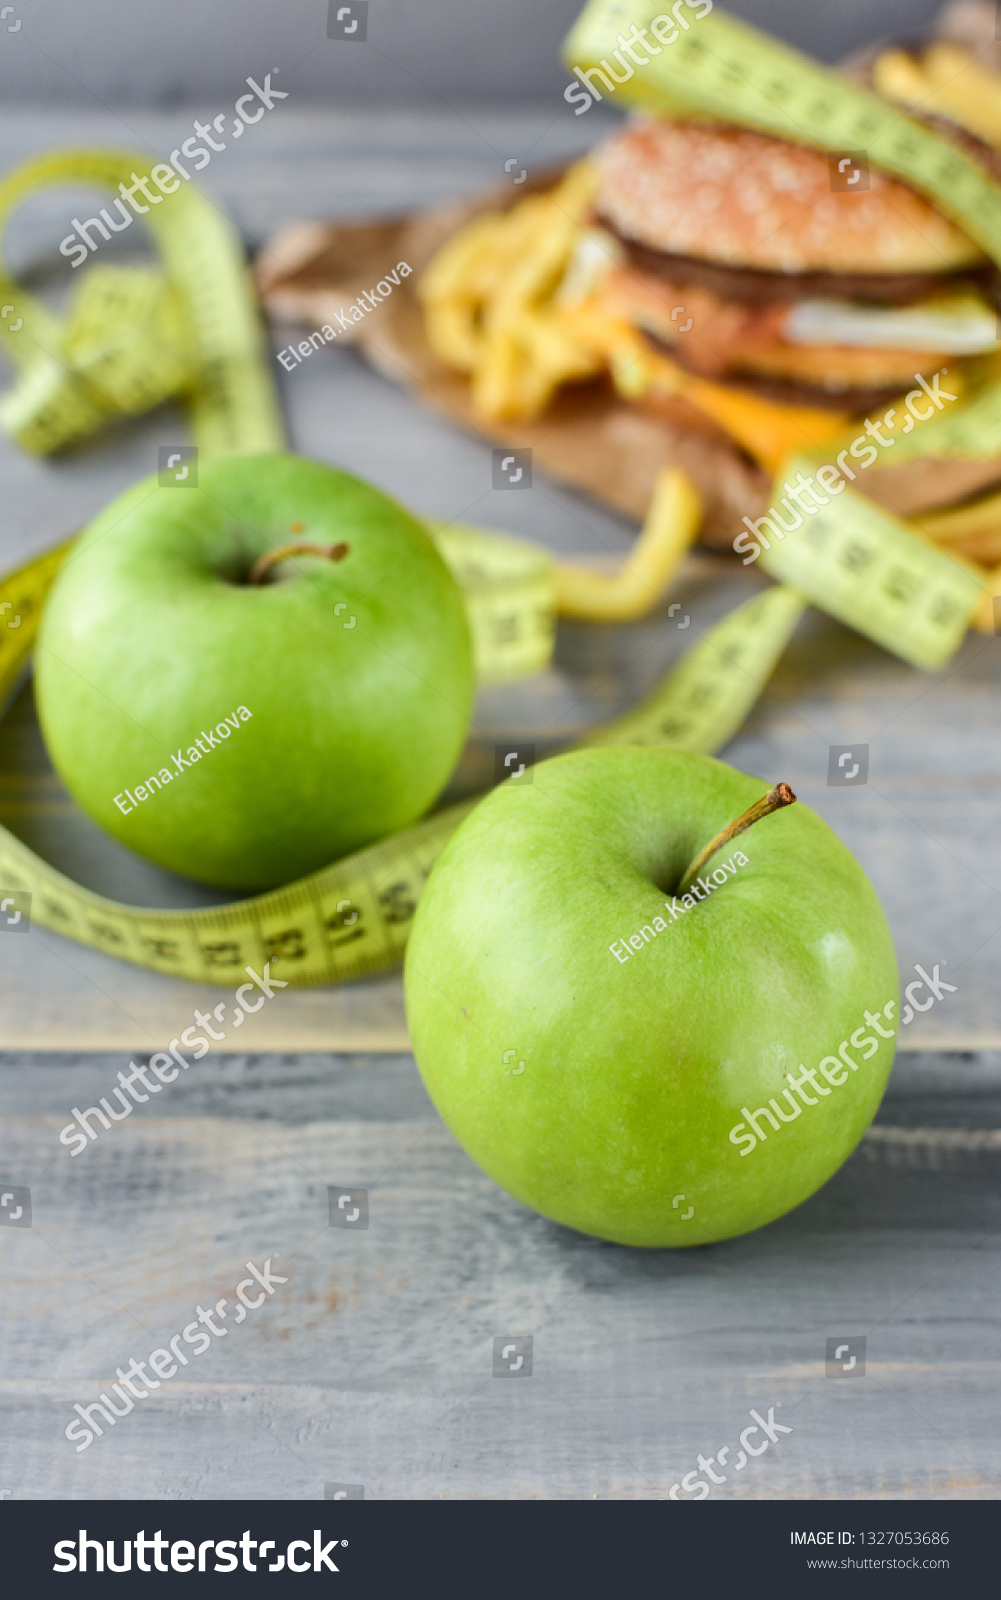 green apples on the background of a burger and fries. Sewing Tape Measures on the food. concept of opposition  healthy food and junk food. selective focus #1327053686